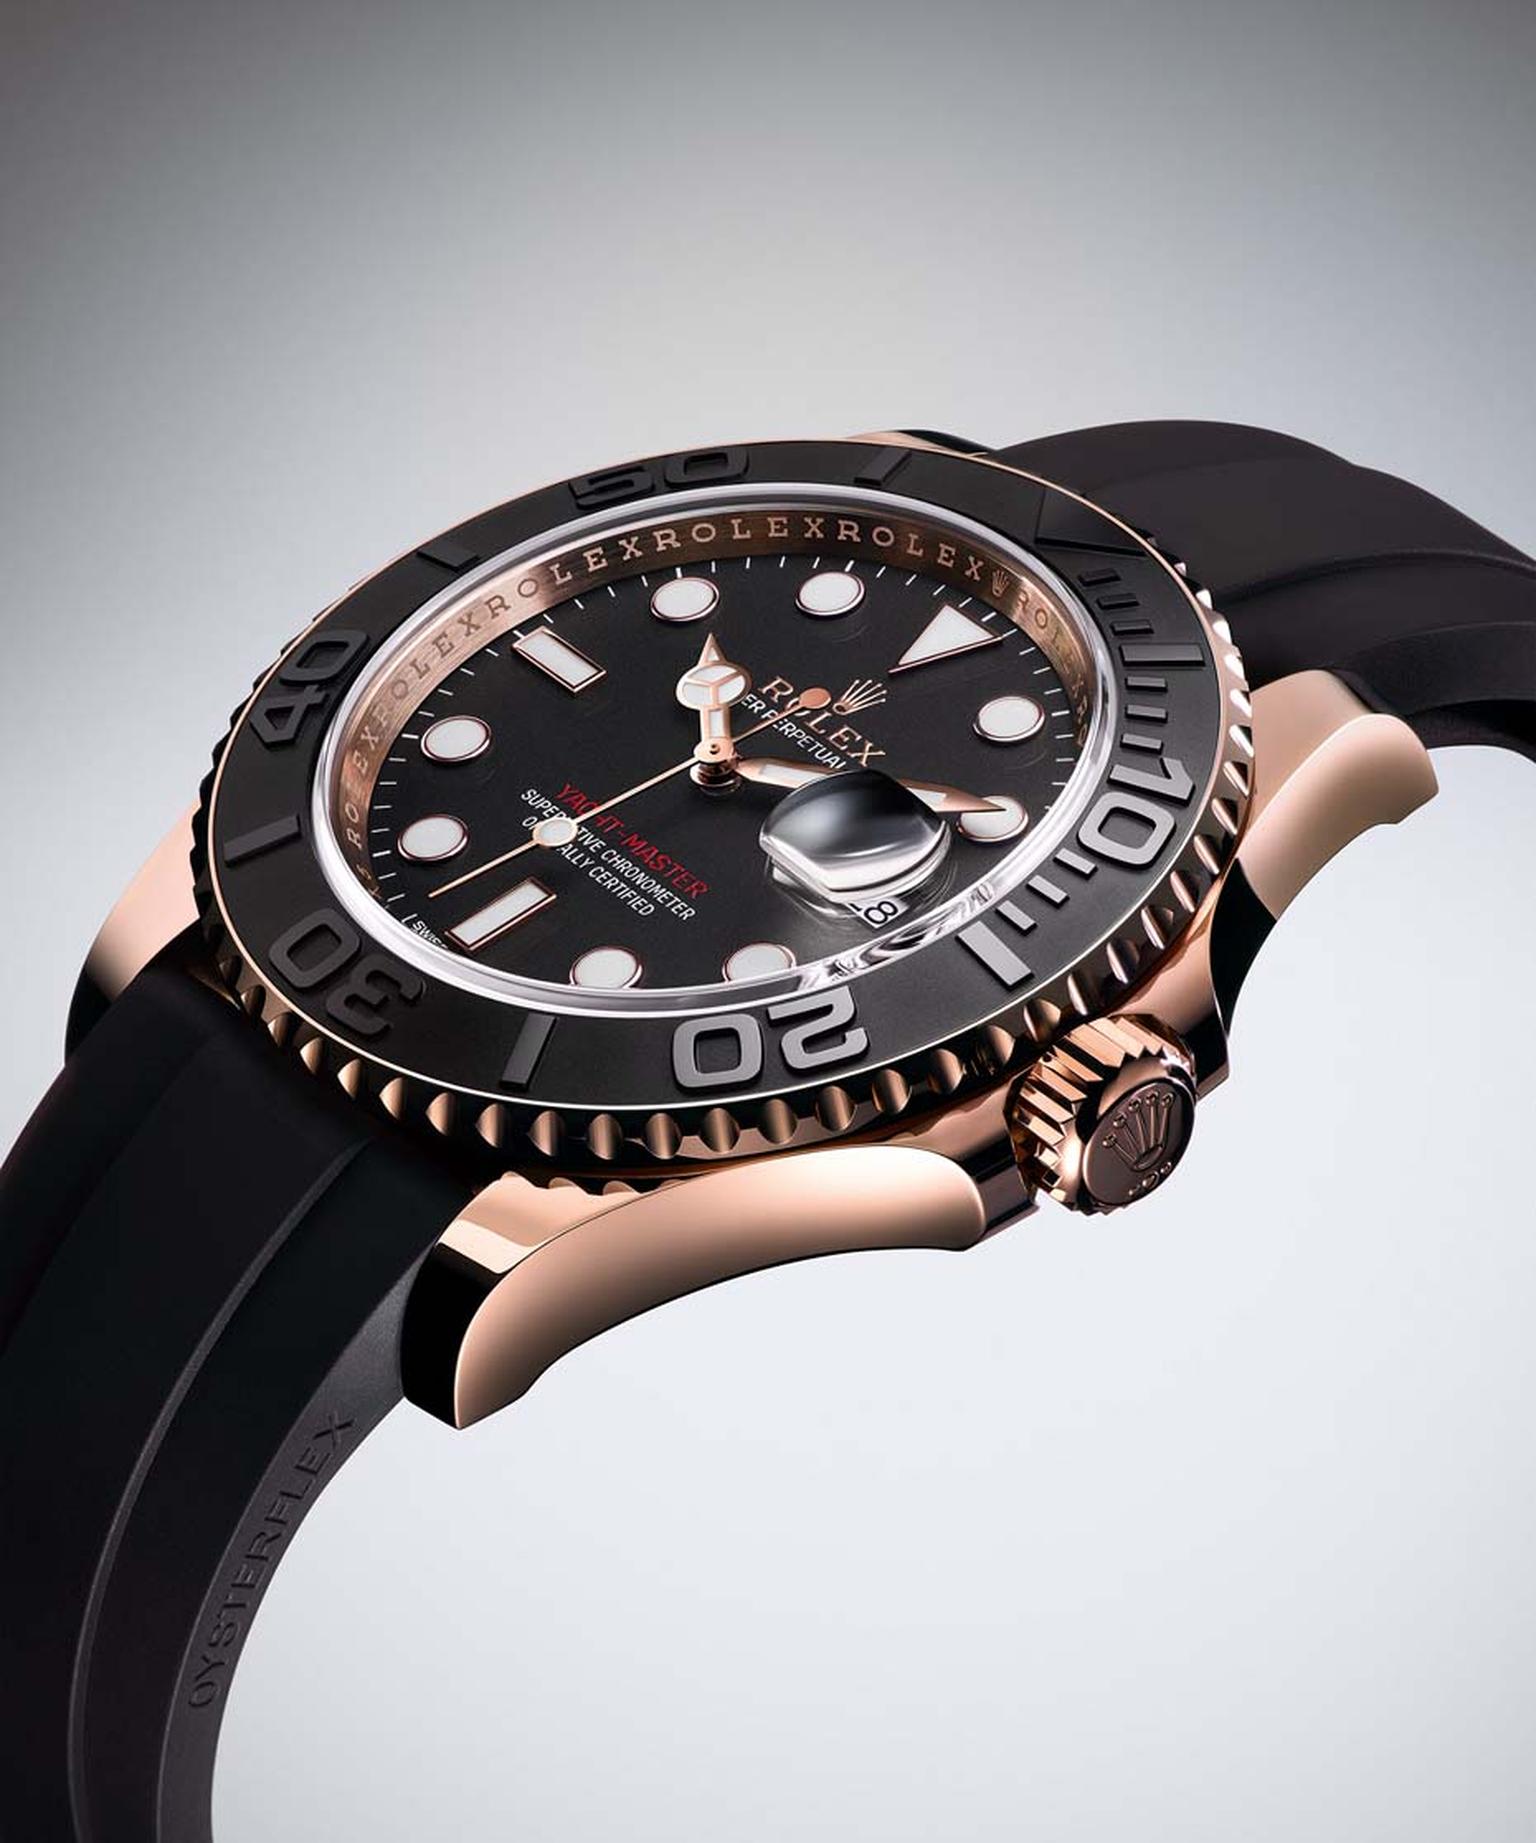 Rolex's new Yacht-Master 40mm watch comes on an innovative Oysterflex bracelet, a resilient and sporty alternative to the traditional metal bracelet. The high-tech strap is made from blades of flexible metal, which are covered in black elastomer for enhan